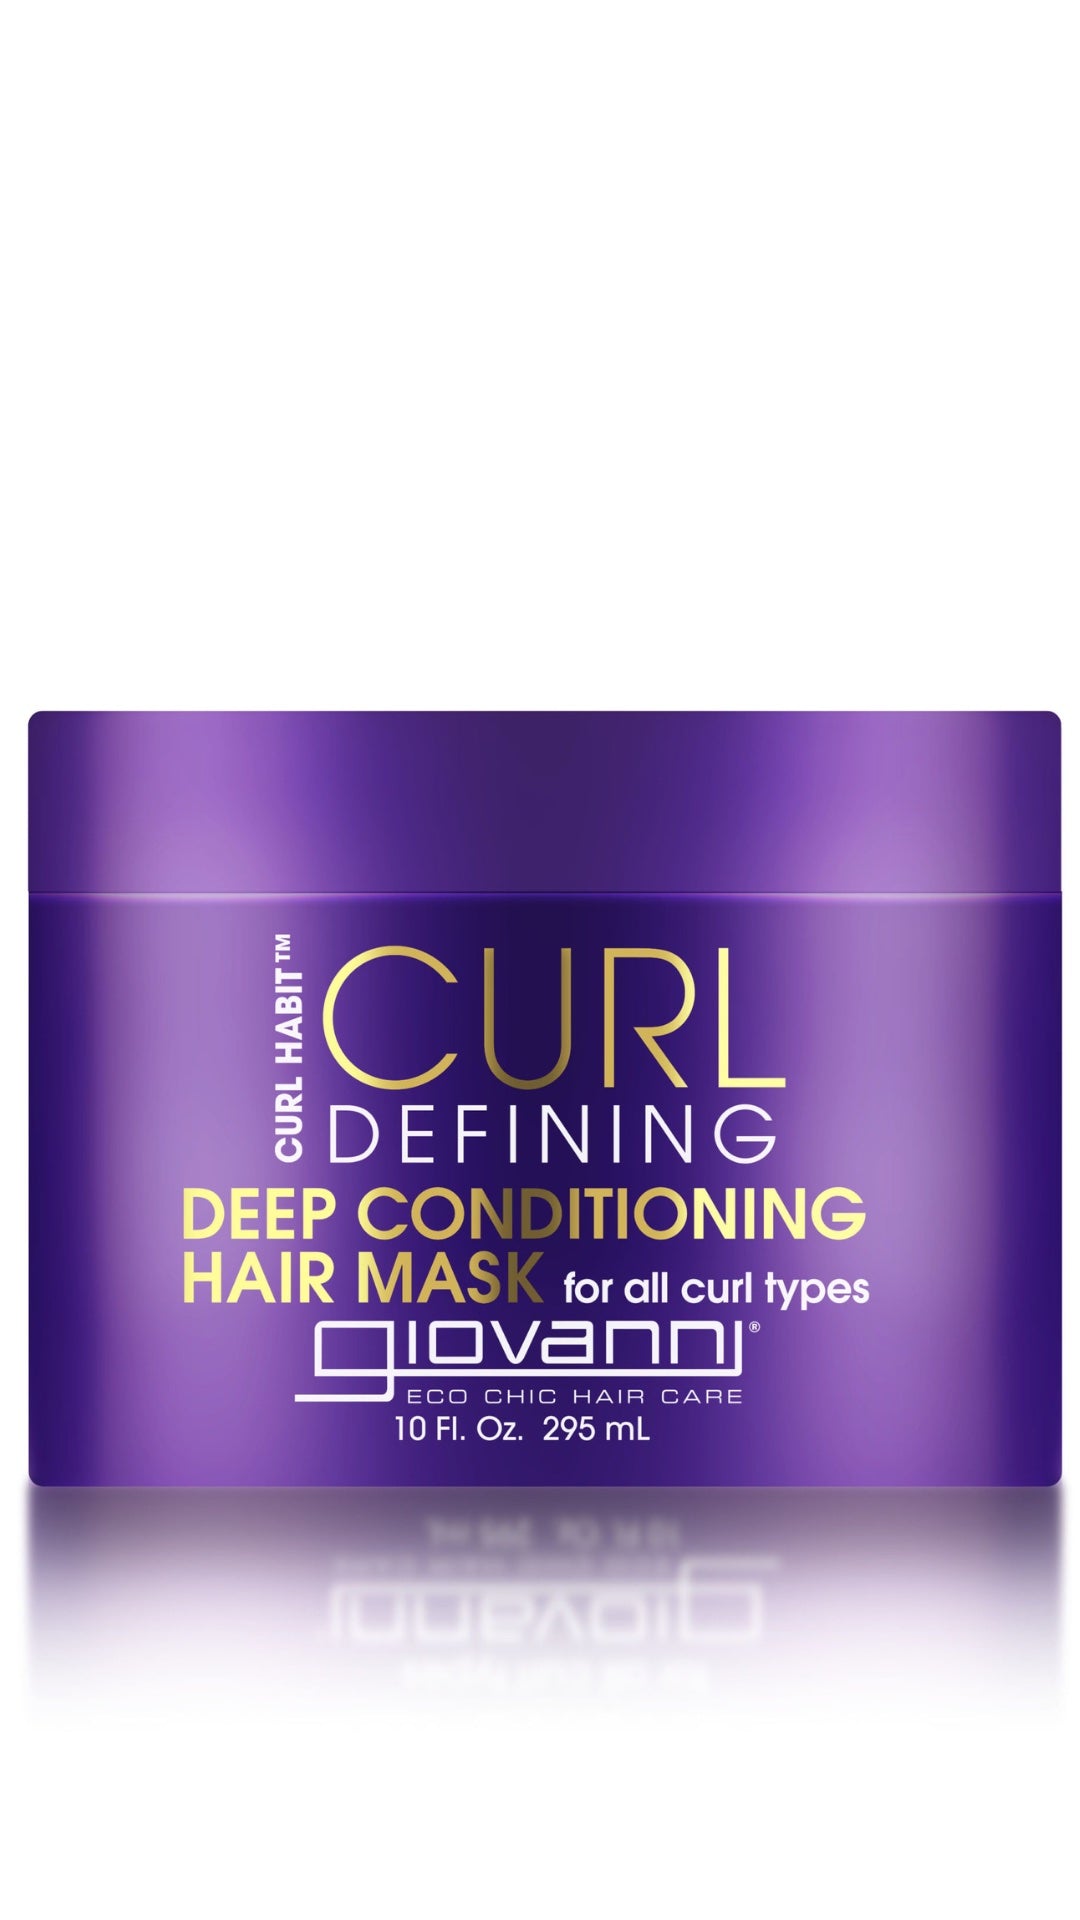 GIOVANNI - Curl Defining Deep Conditioning Hair Mask for all Curl Types